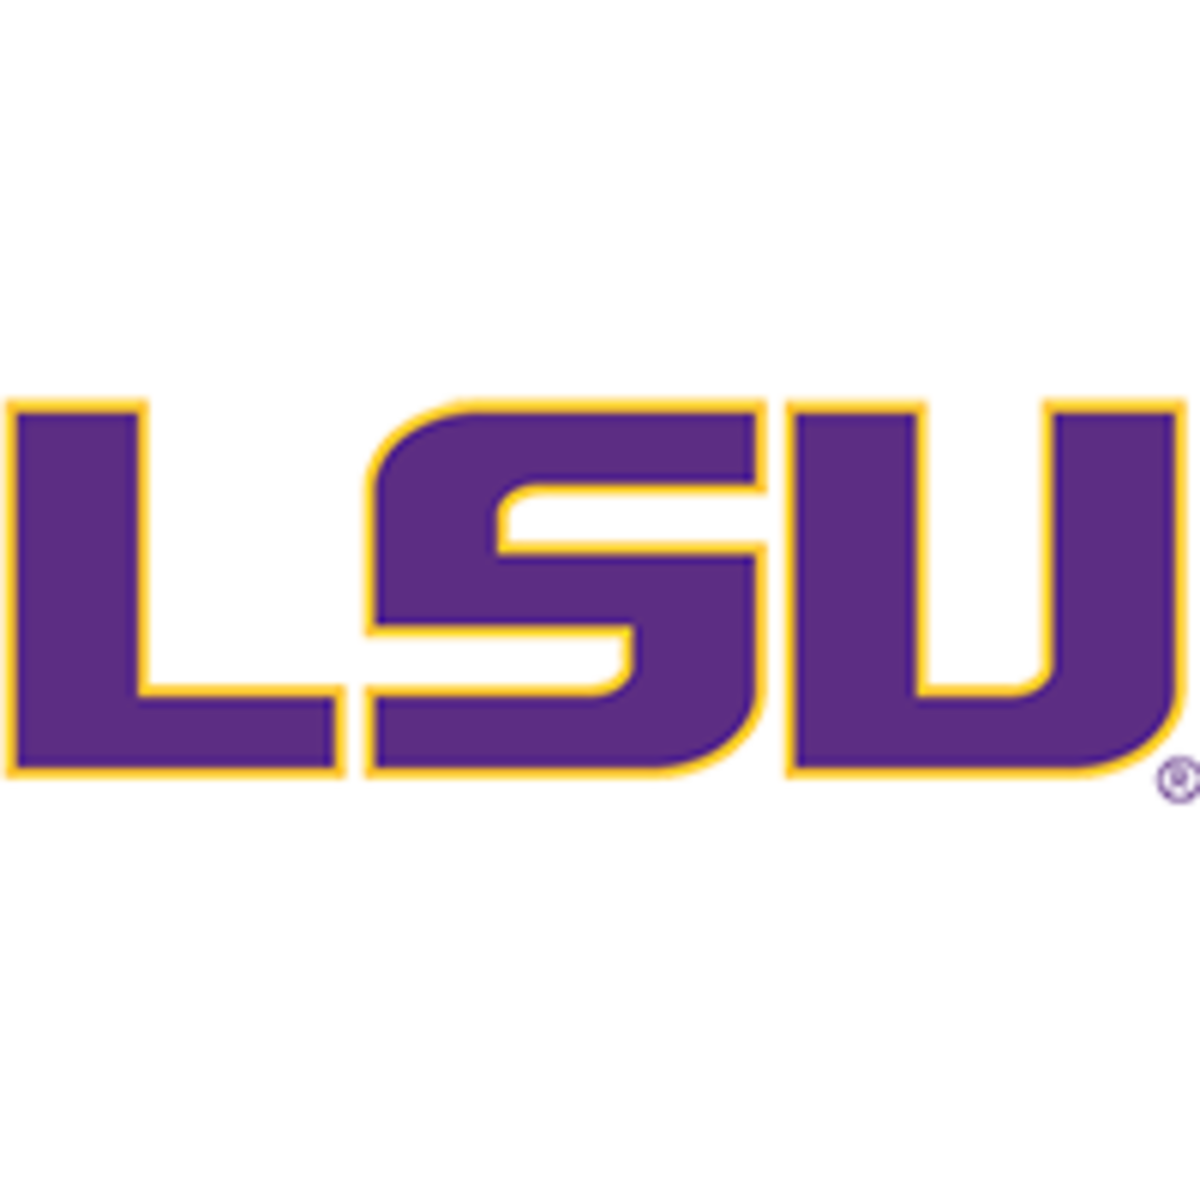 Lsu Football Schedule For 2022 Lsu Football Schedule 2022 - Athlonsports.com | Expert Predictions, Picks,  And Previews